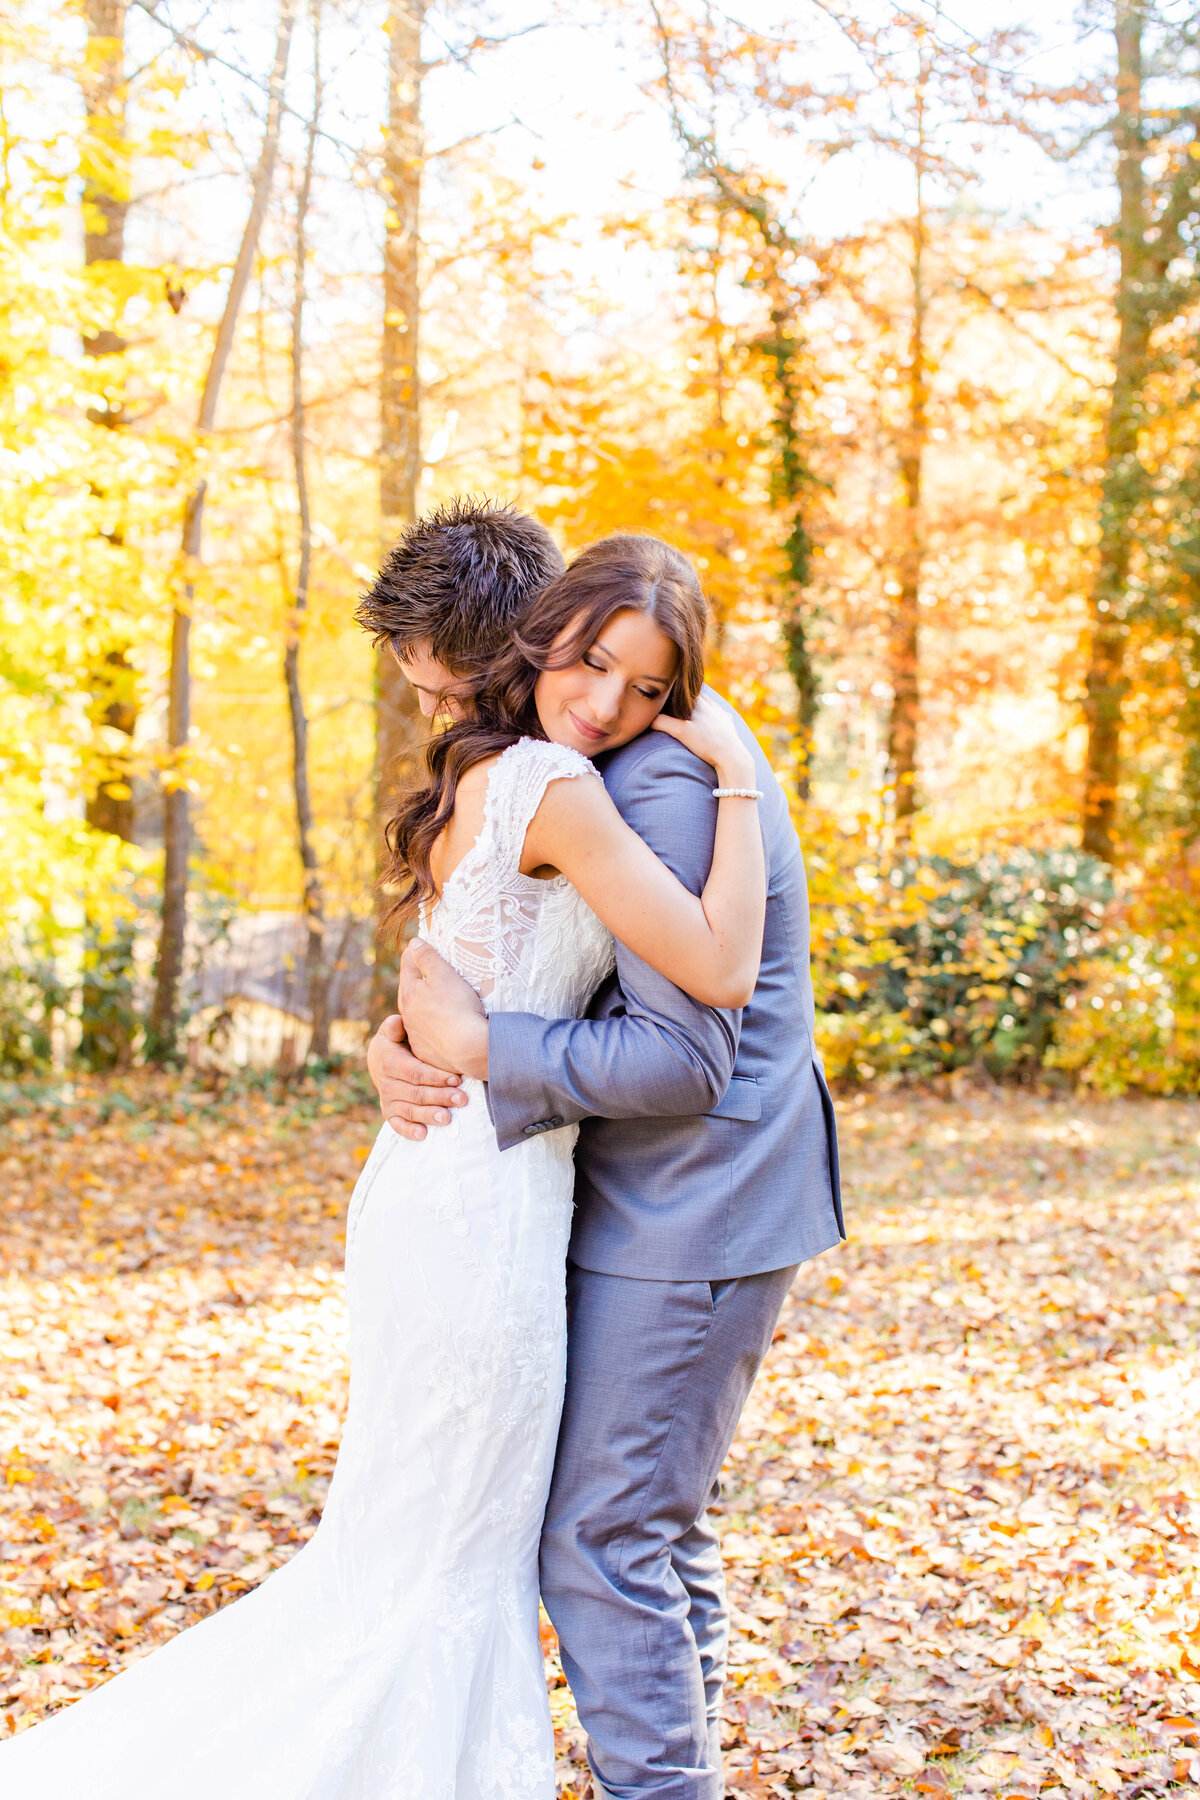 bride and groom hugging in fall setting